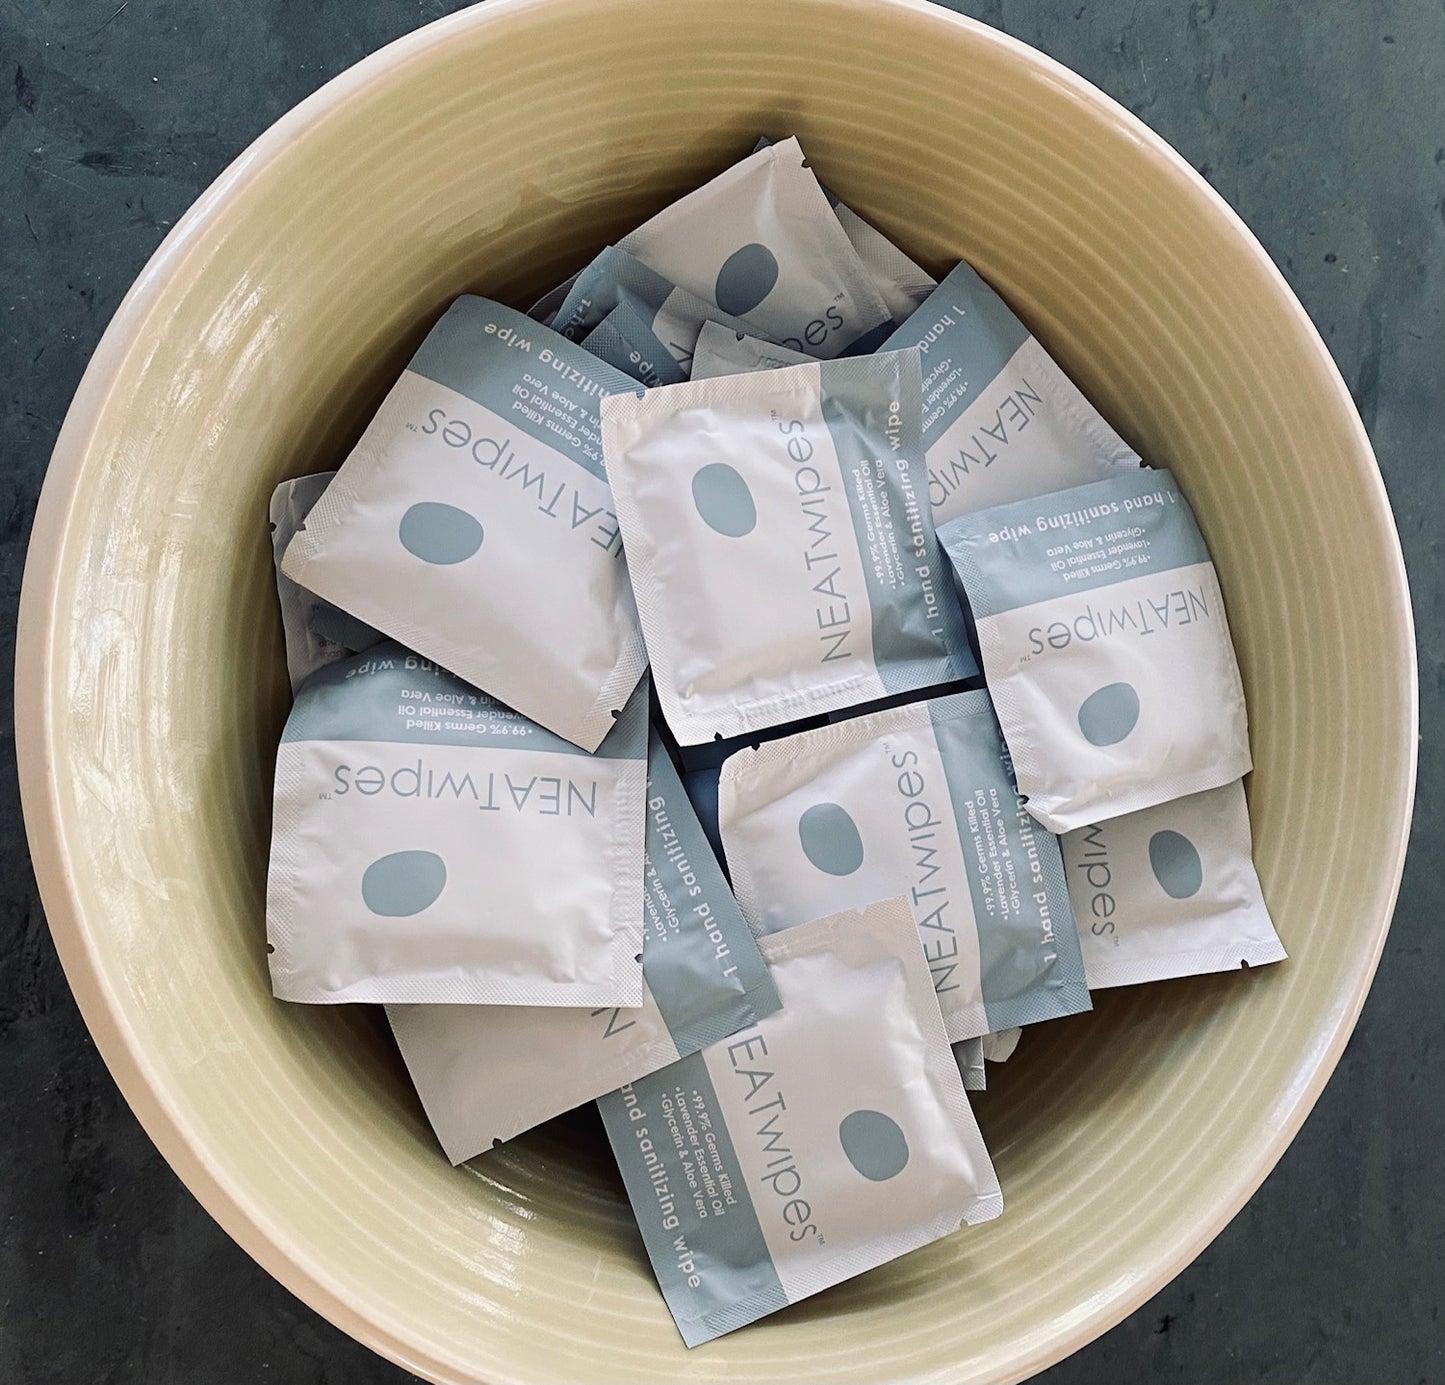 NEATwipes Lavender  hand wipes in a ceramic bowl.